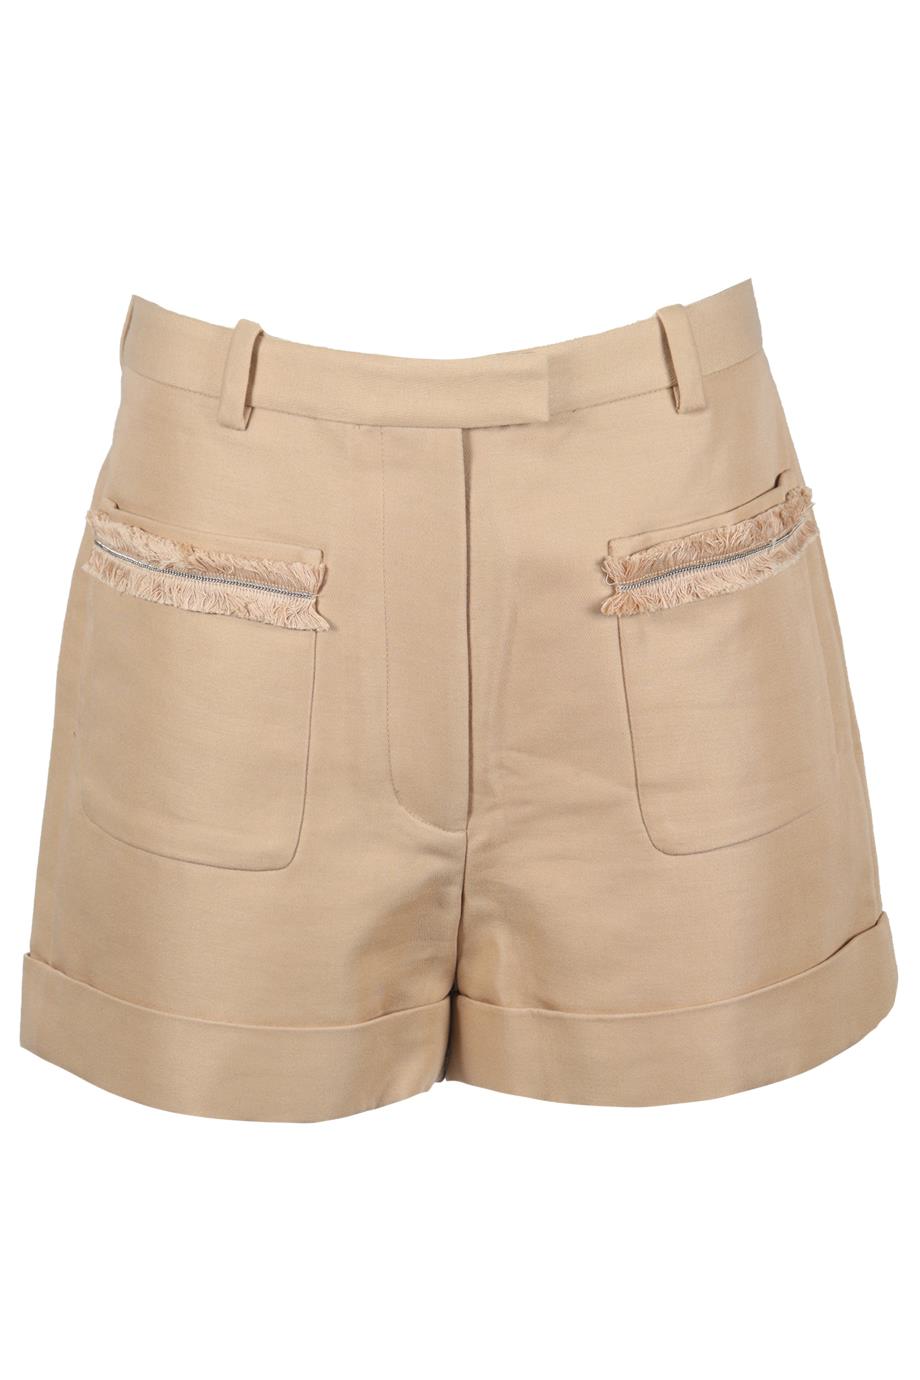 3.1 PHILLIP LIM COTTON AND WOOL BLEND SHORTS US 6 UK 10